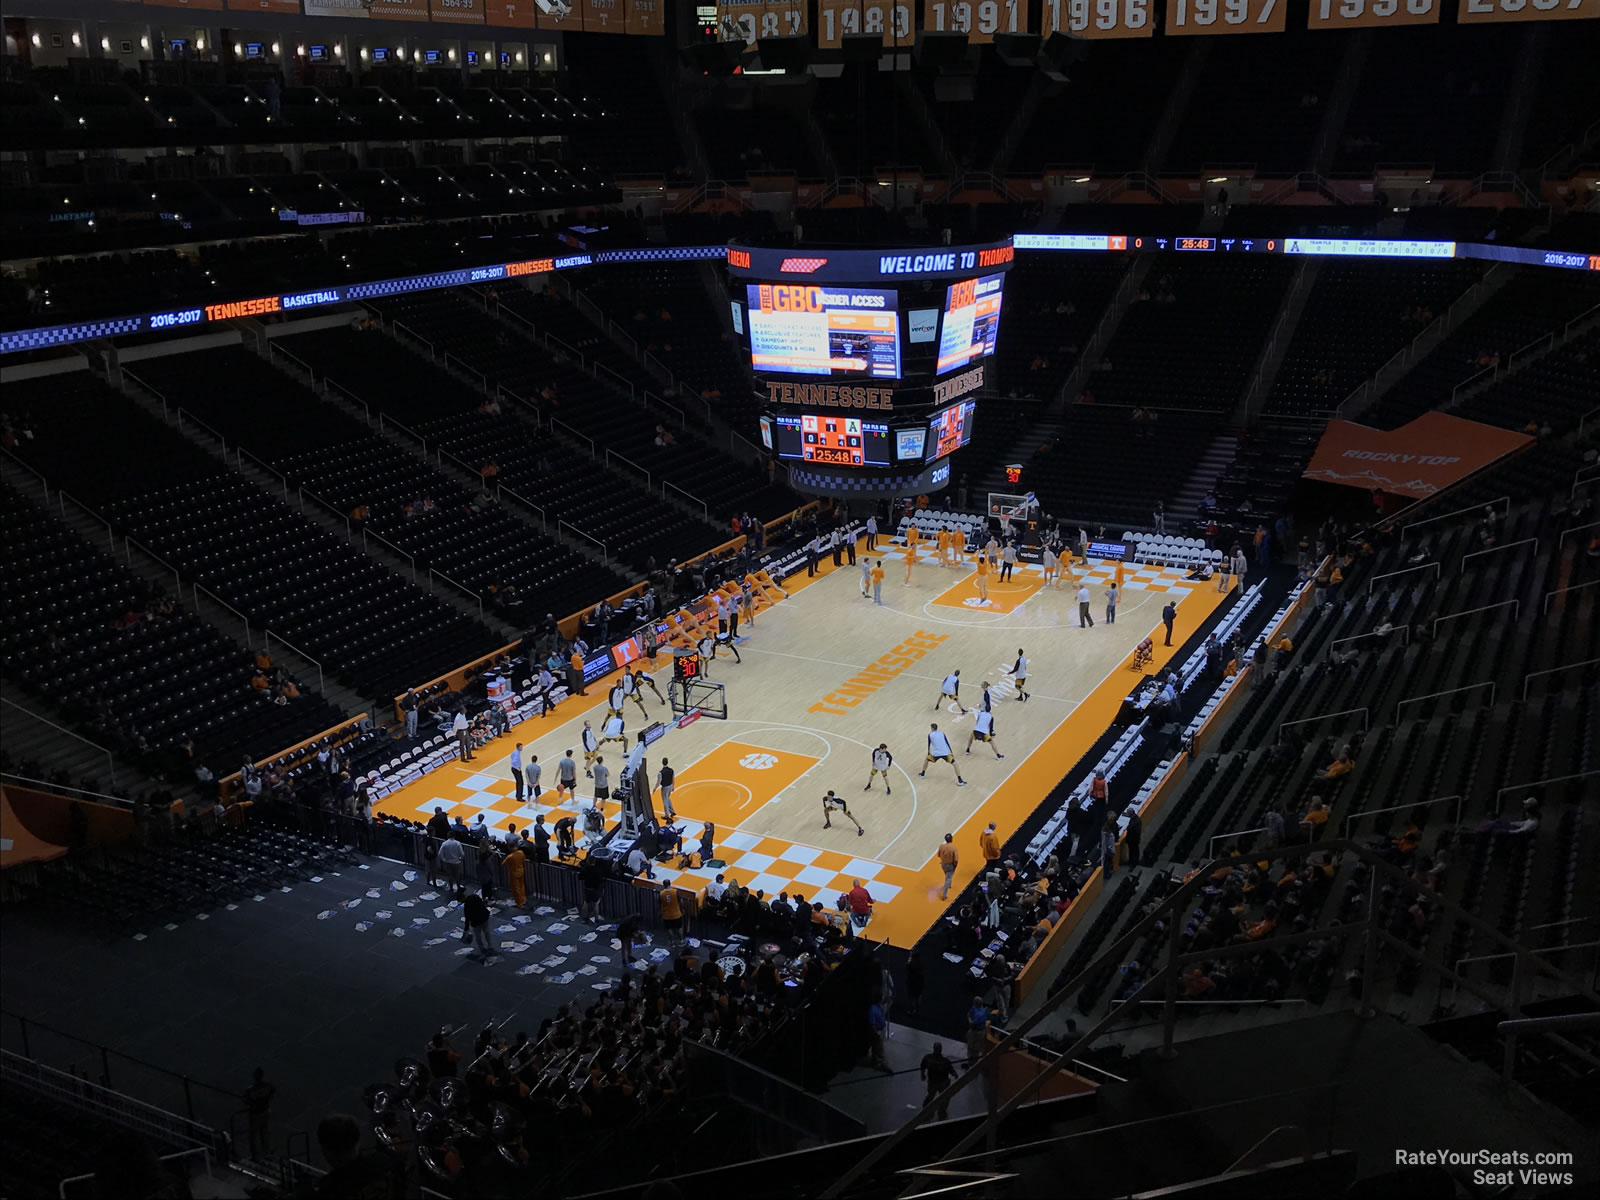 section 327, row 7 seat view  - thompson-boling arena